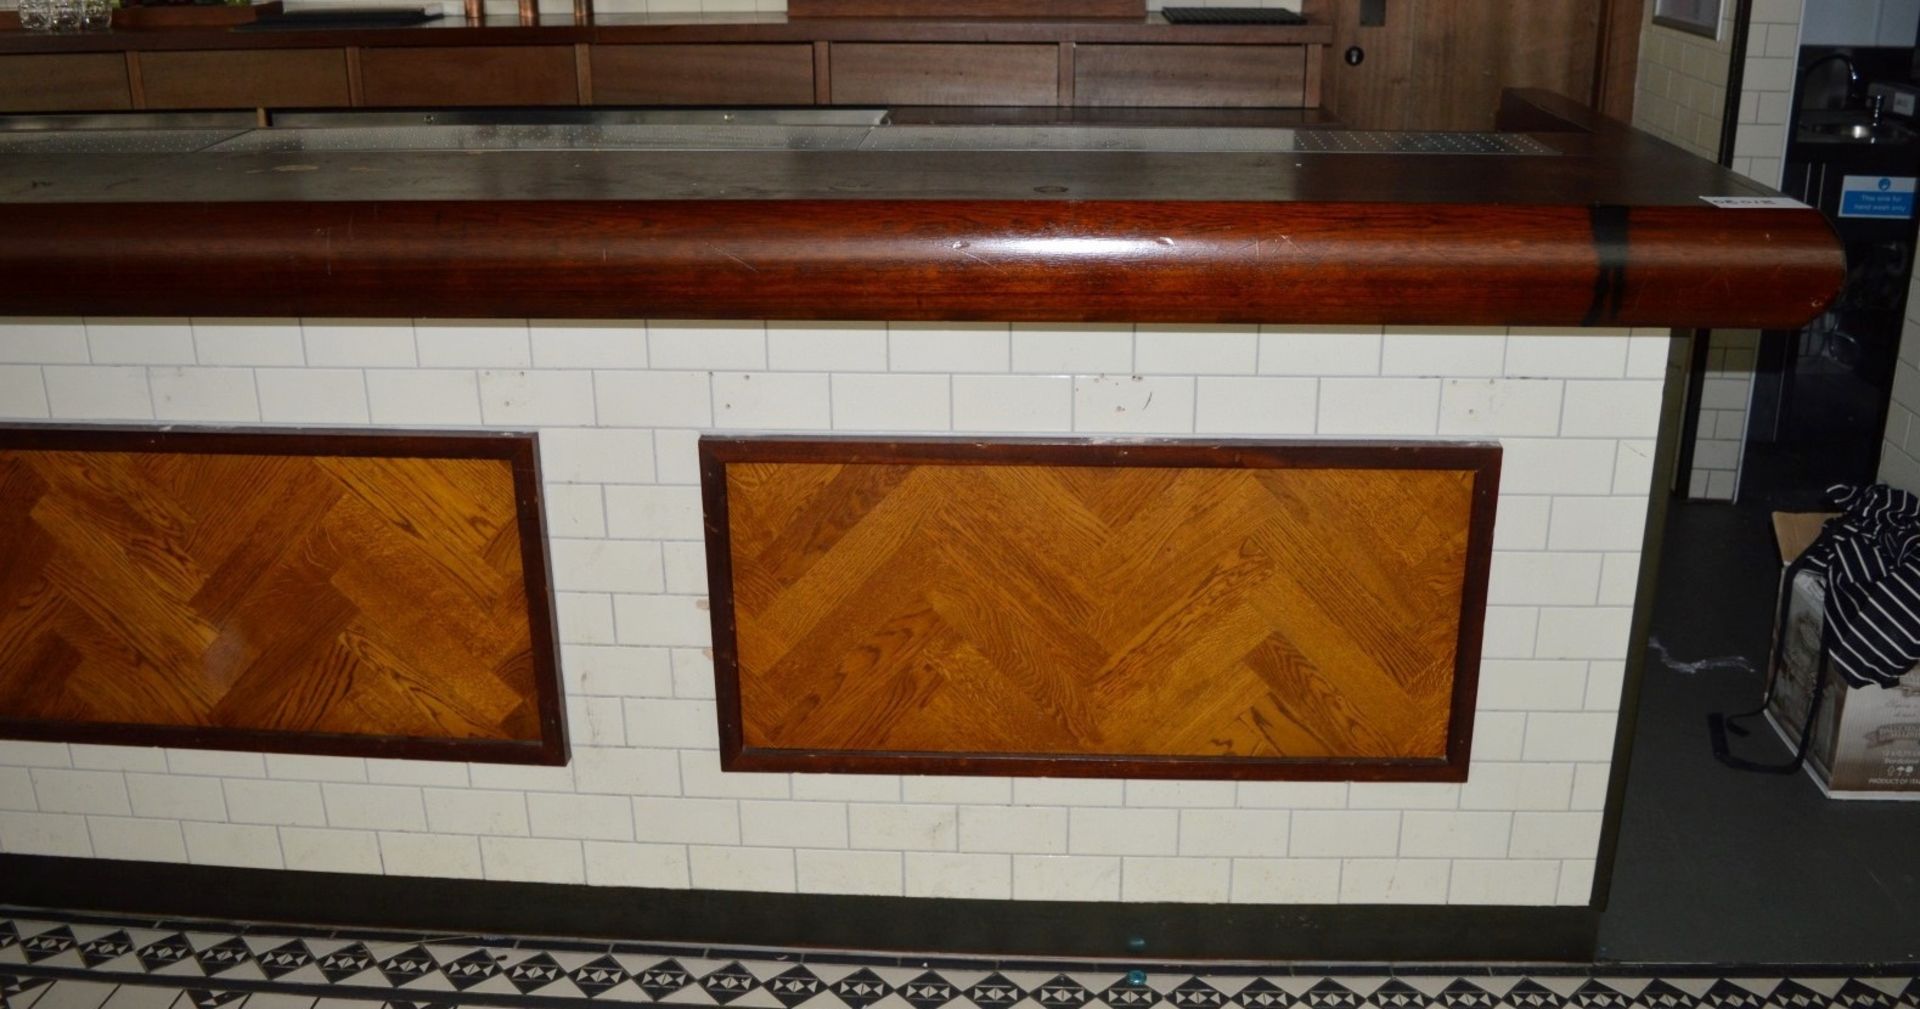 1 x Large Pub / Restuarant Bar With Tiled Front and Framed Parquet Flooring Design - Also Includes - Image 2 of 25